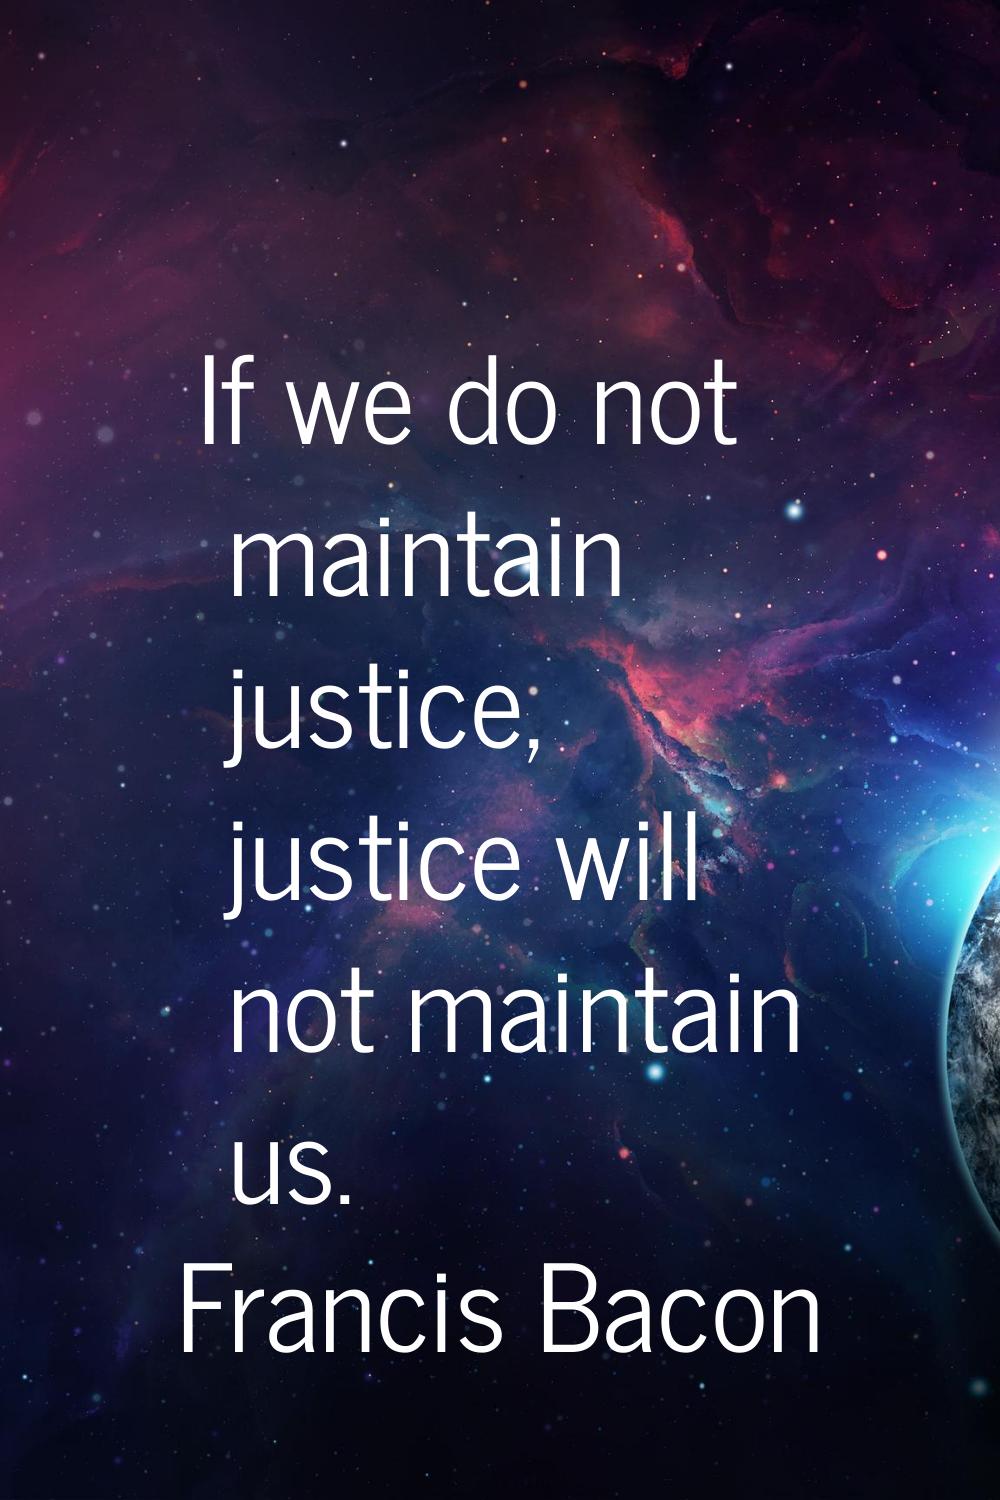 If we do not maintain justice, justice will not maintain us.